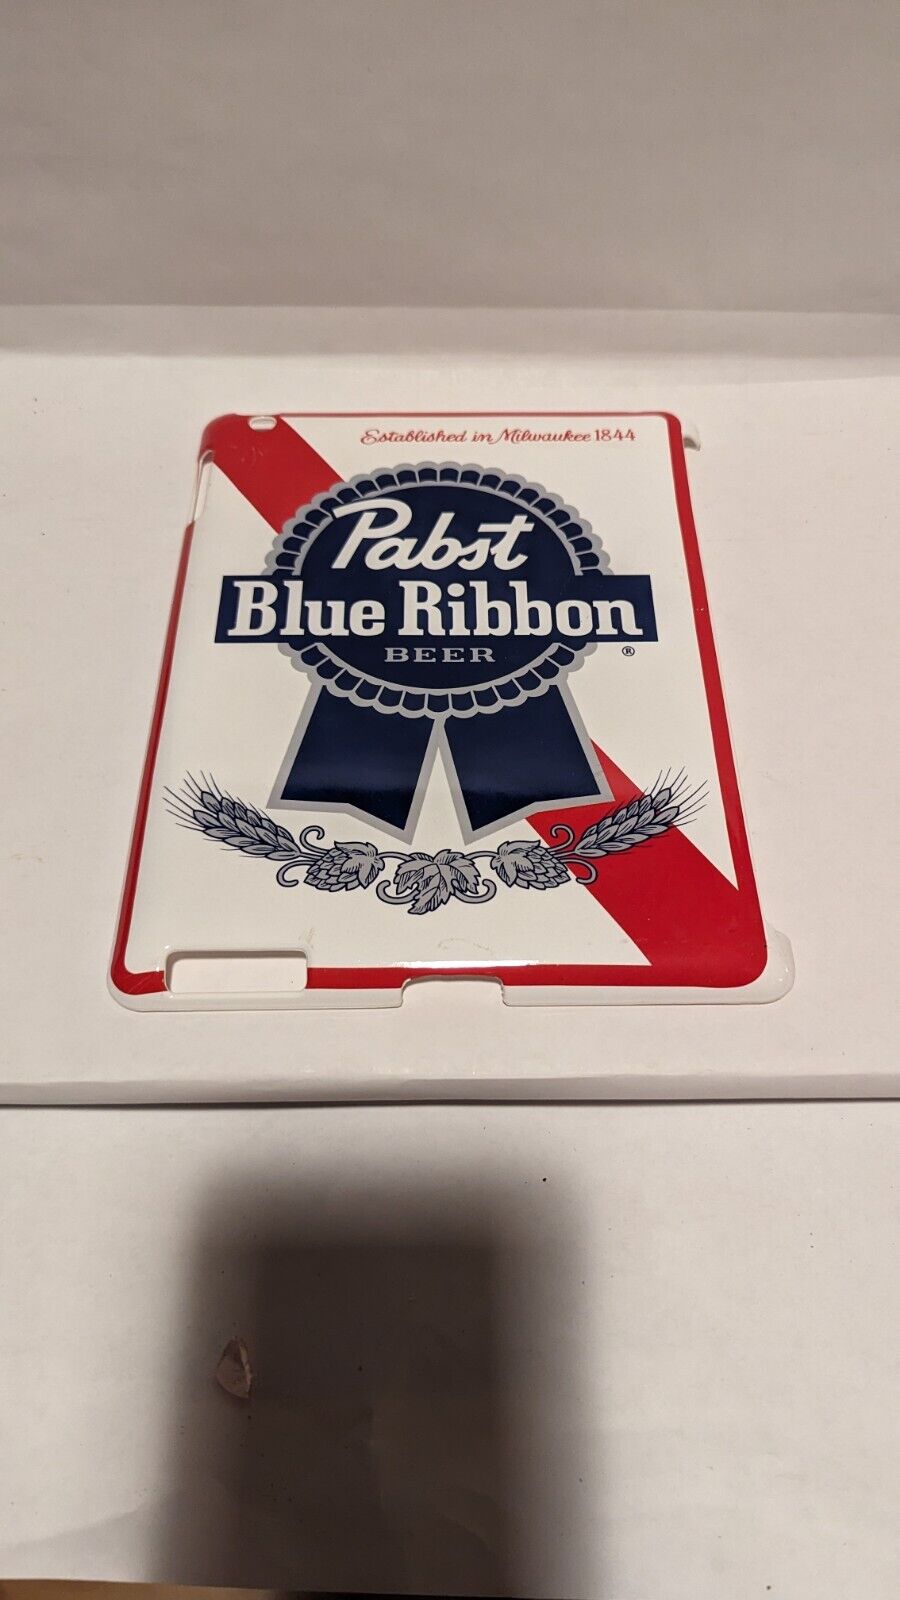 Pabst Blue Ribbon Beer iPad Tablet Cover